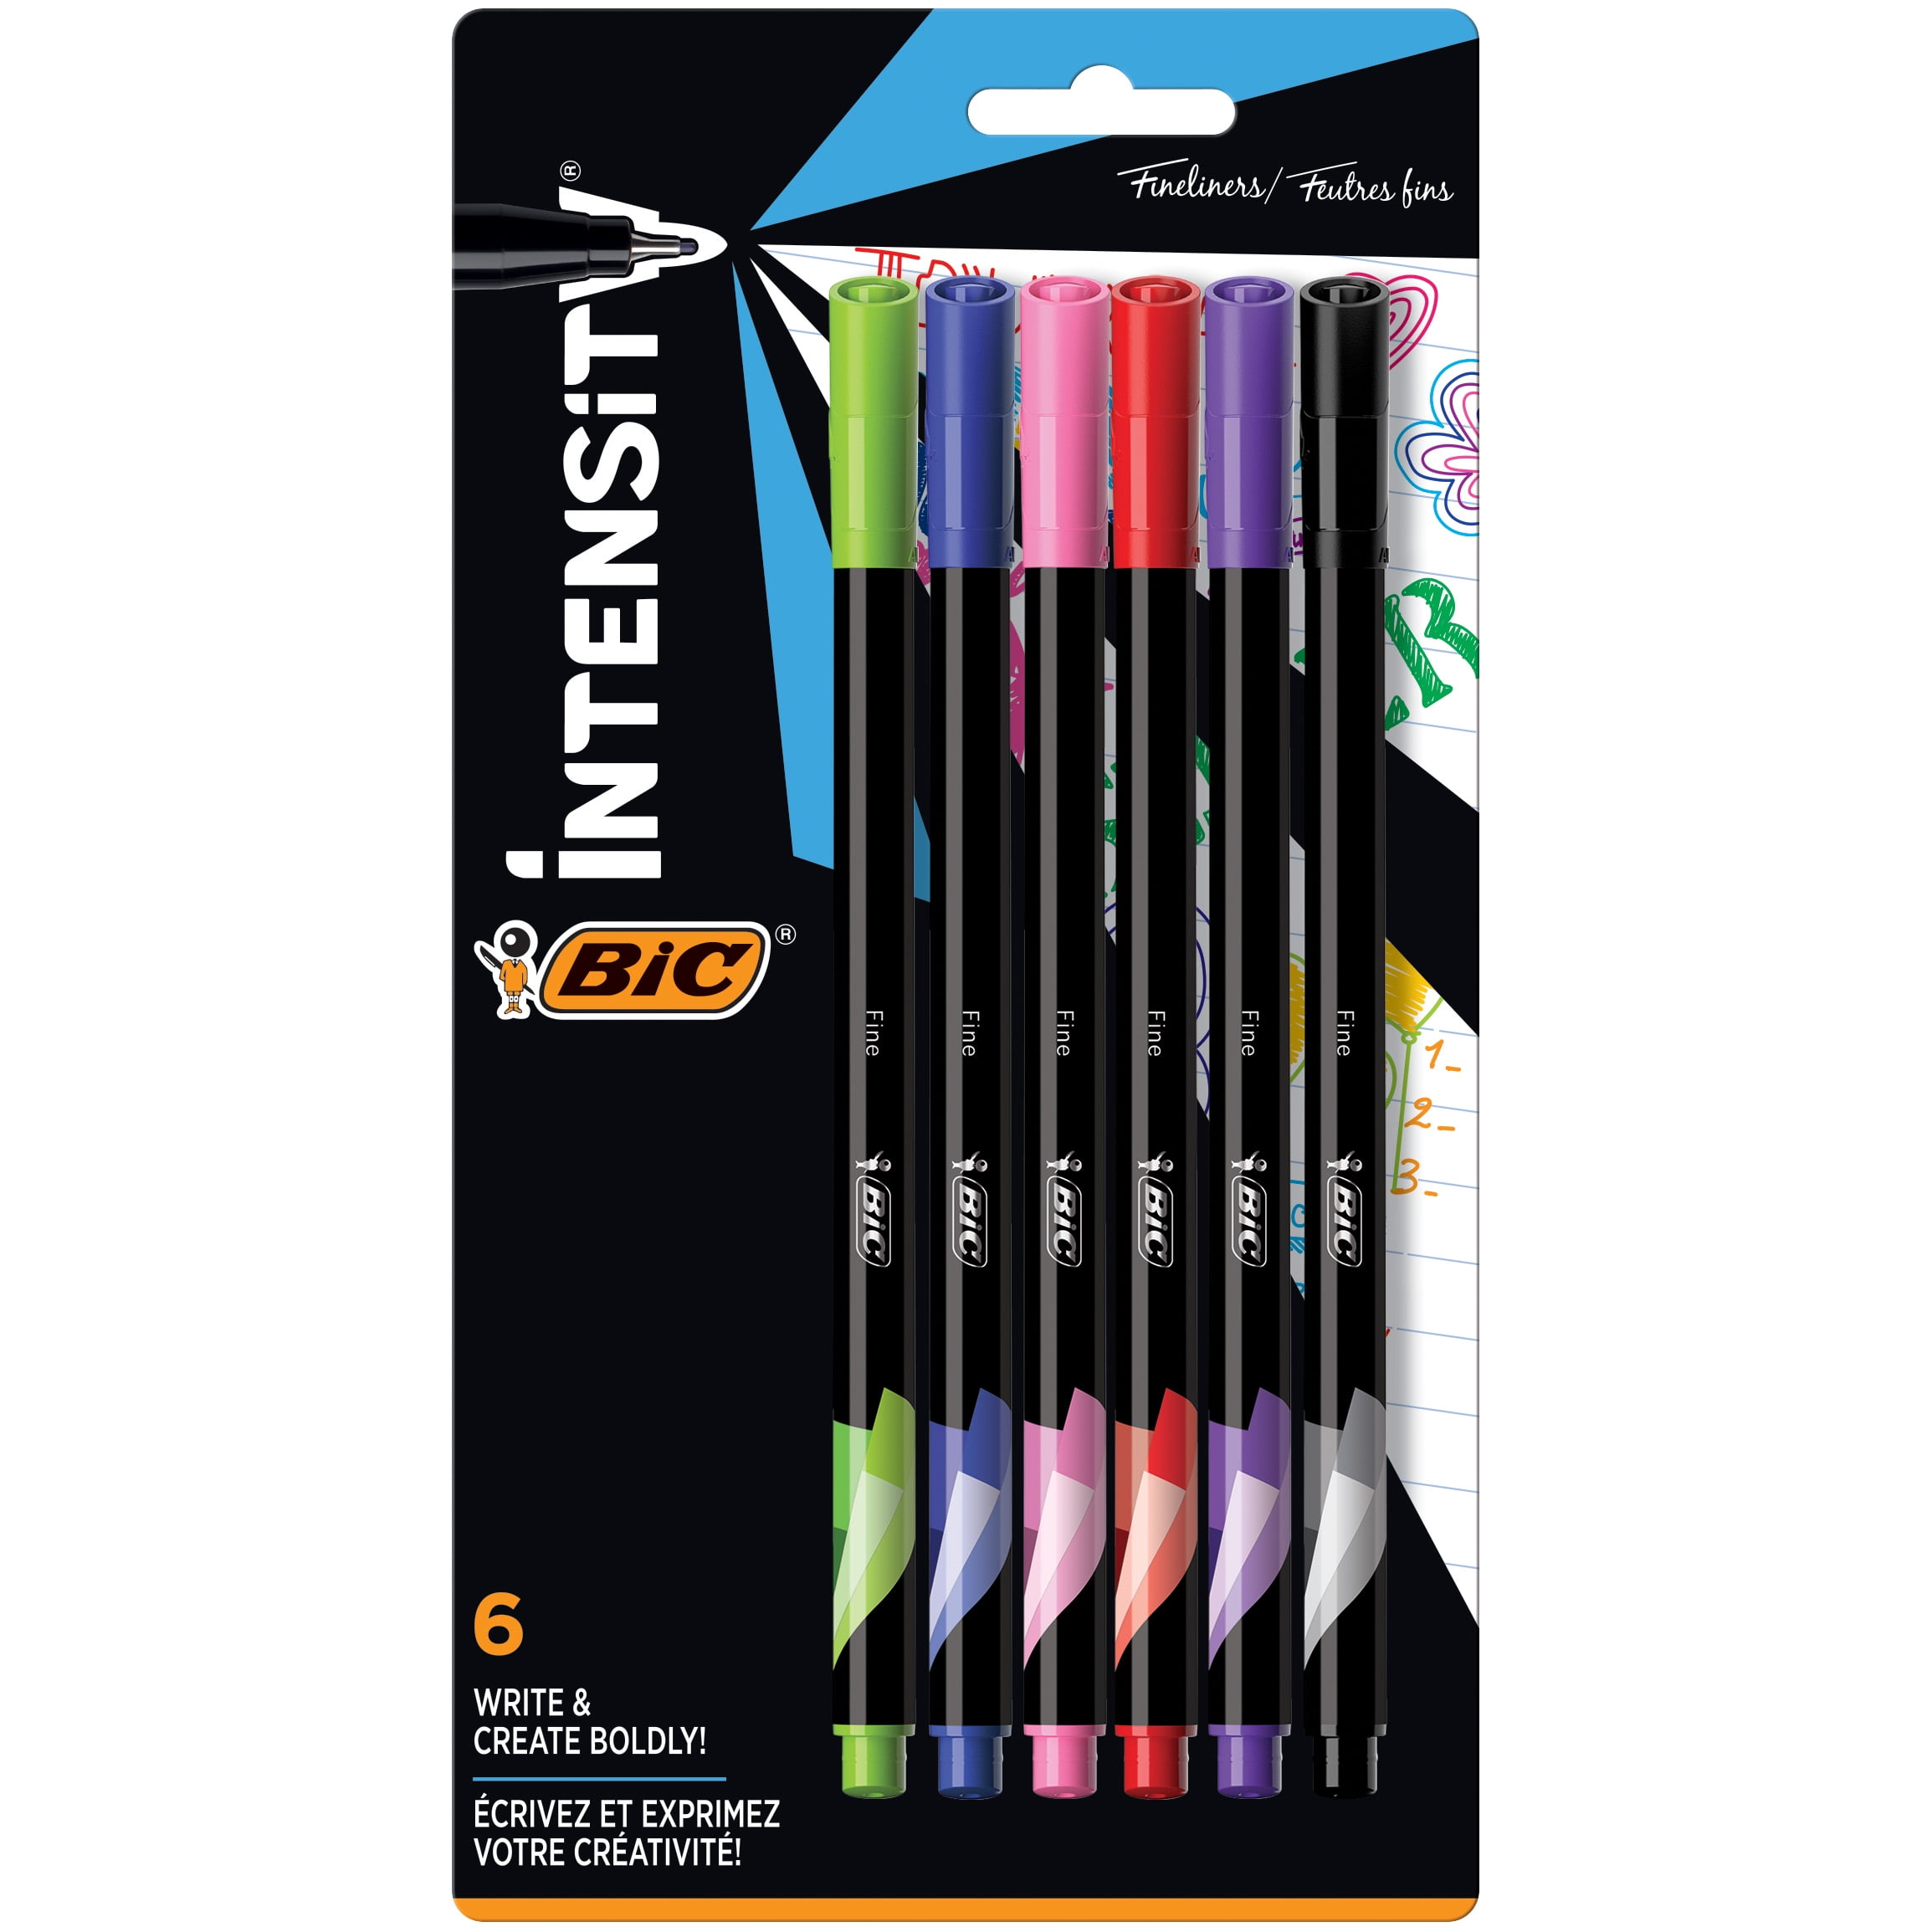 Bic Intensity Fashion Permanent Markers, Ultra Fine Point, Assorted Colors, Non-Slip Grip for Comfort & Control, 36-Count